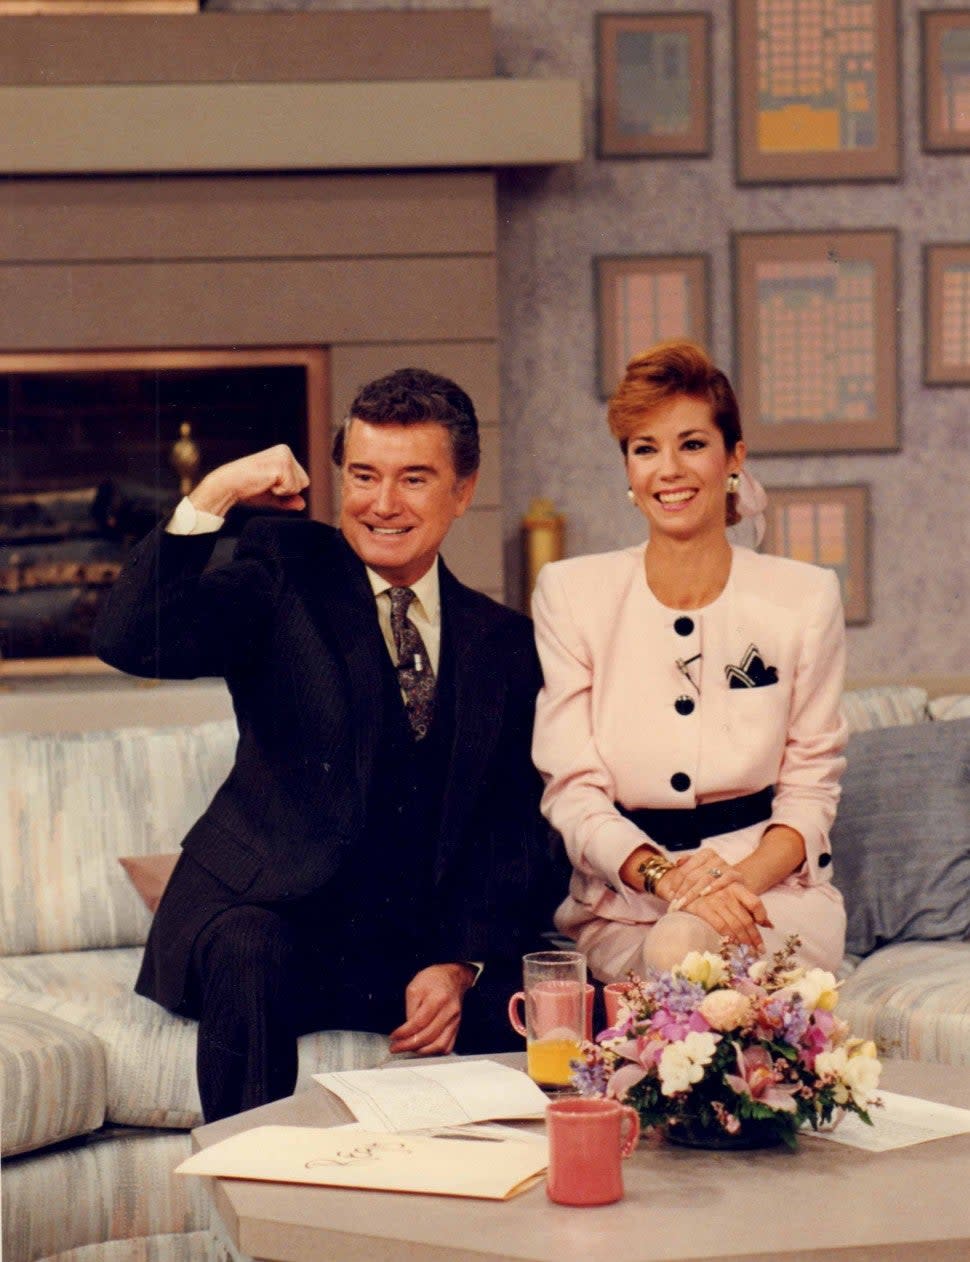 Regis Philbin and Kathie Lee Gifford on the set of 